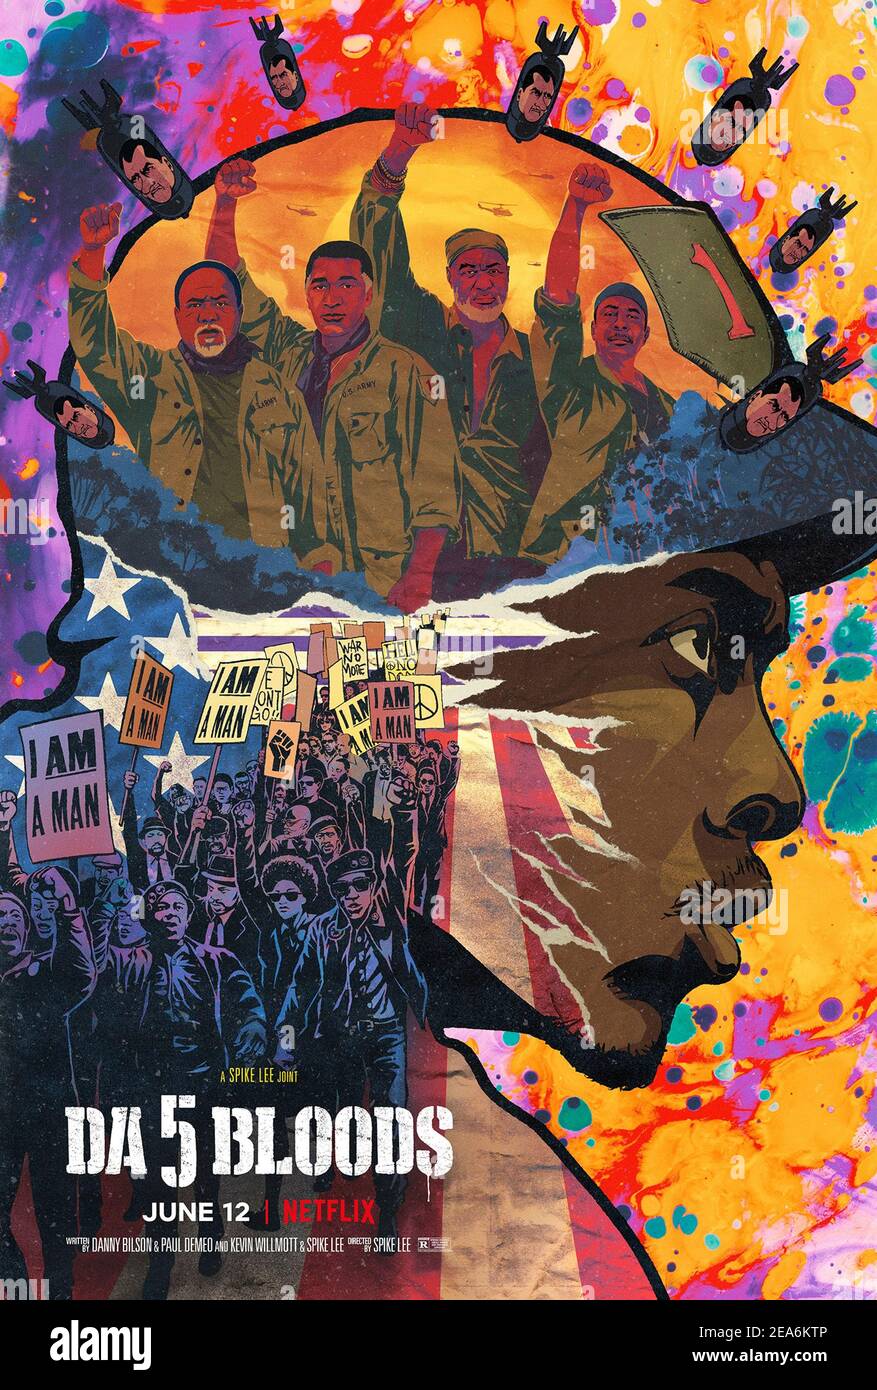 Da 5 Bloods (2020) directed by Spike Lee and starring Delroy Lindo, Jonathan Majors and Clarke Peters. Four African-American Vietnam veterans return to Vietnam to find the remains of their fallen squad leader and the gold fortune they hide together. Stock Photo